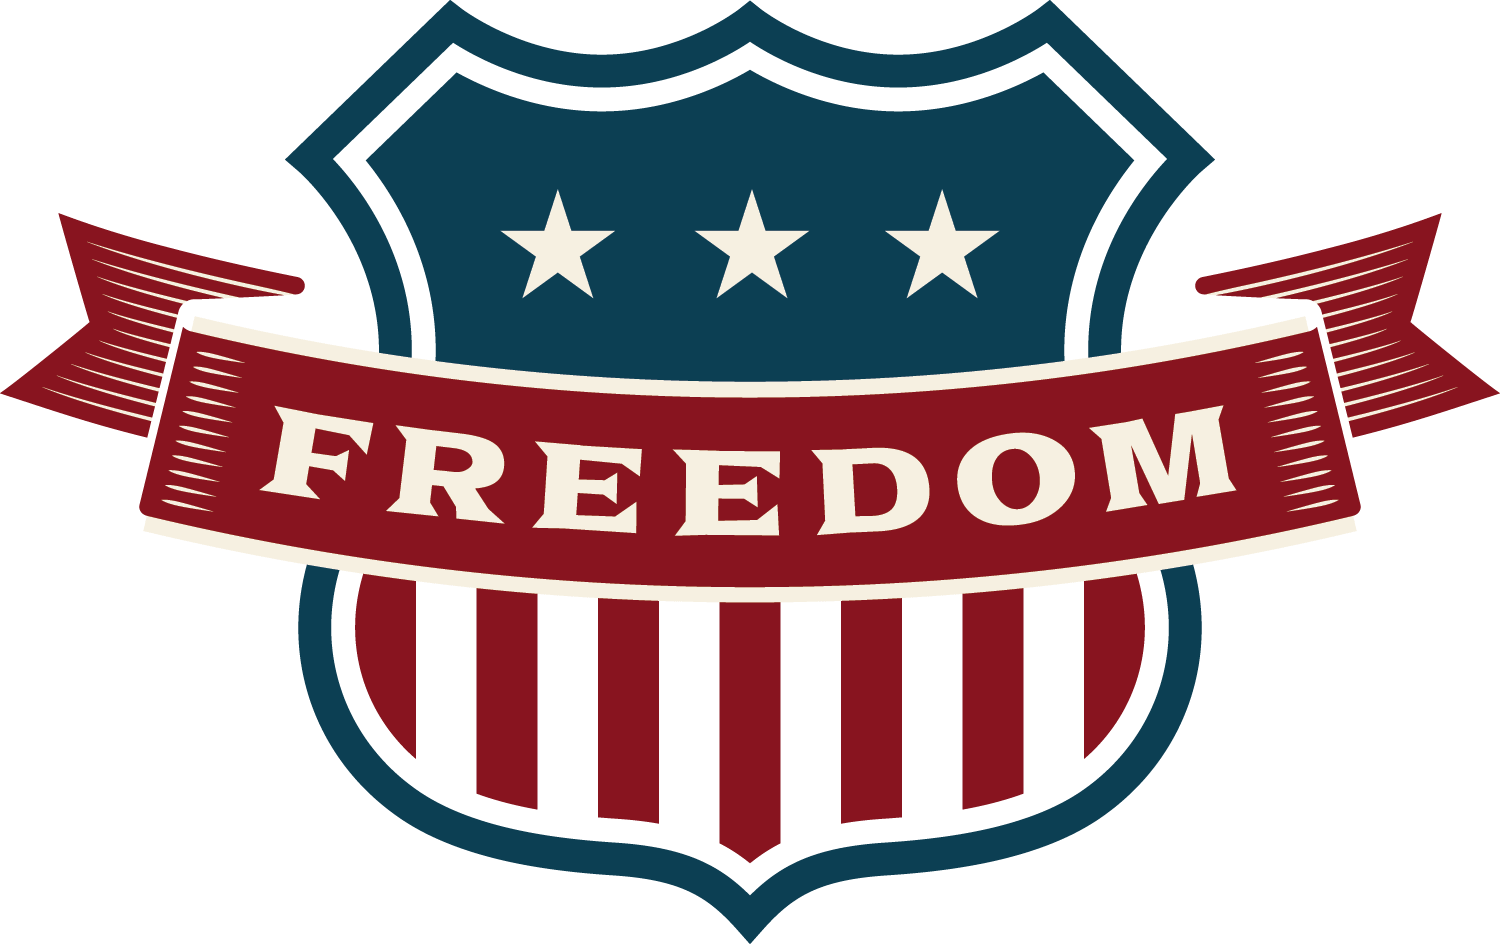 Freedom Prayer of the Day - today's prayer of the day focuses on Freedom. #Freedom #PrayeroftheDay